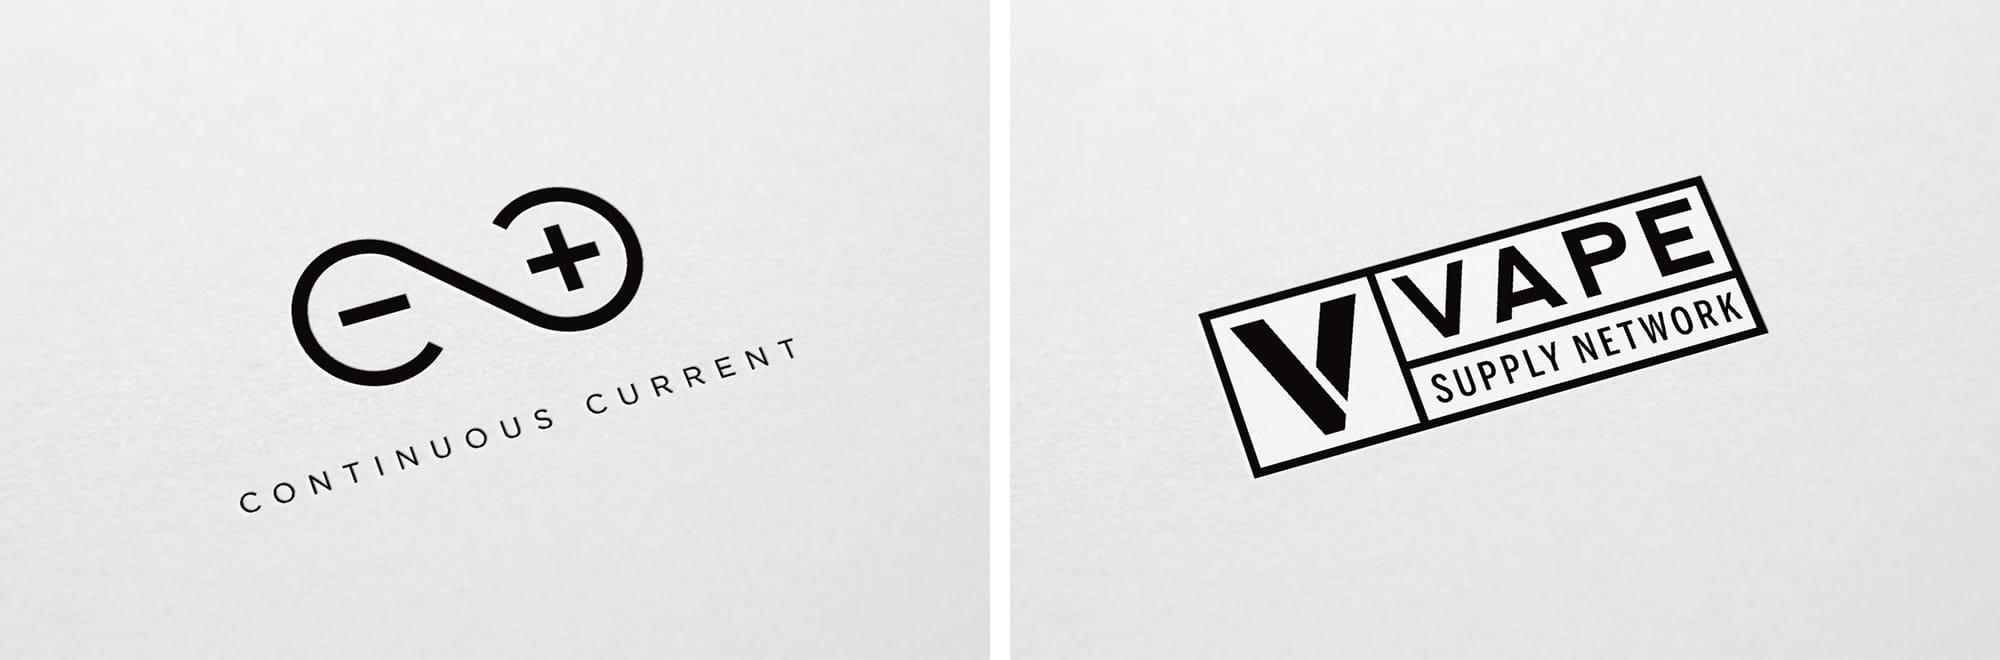 ContinuousCurrent-VapeSupply-logo-banner